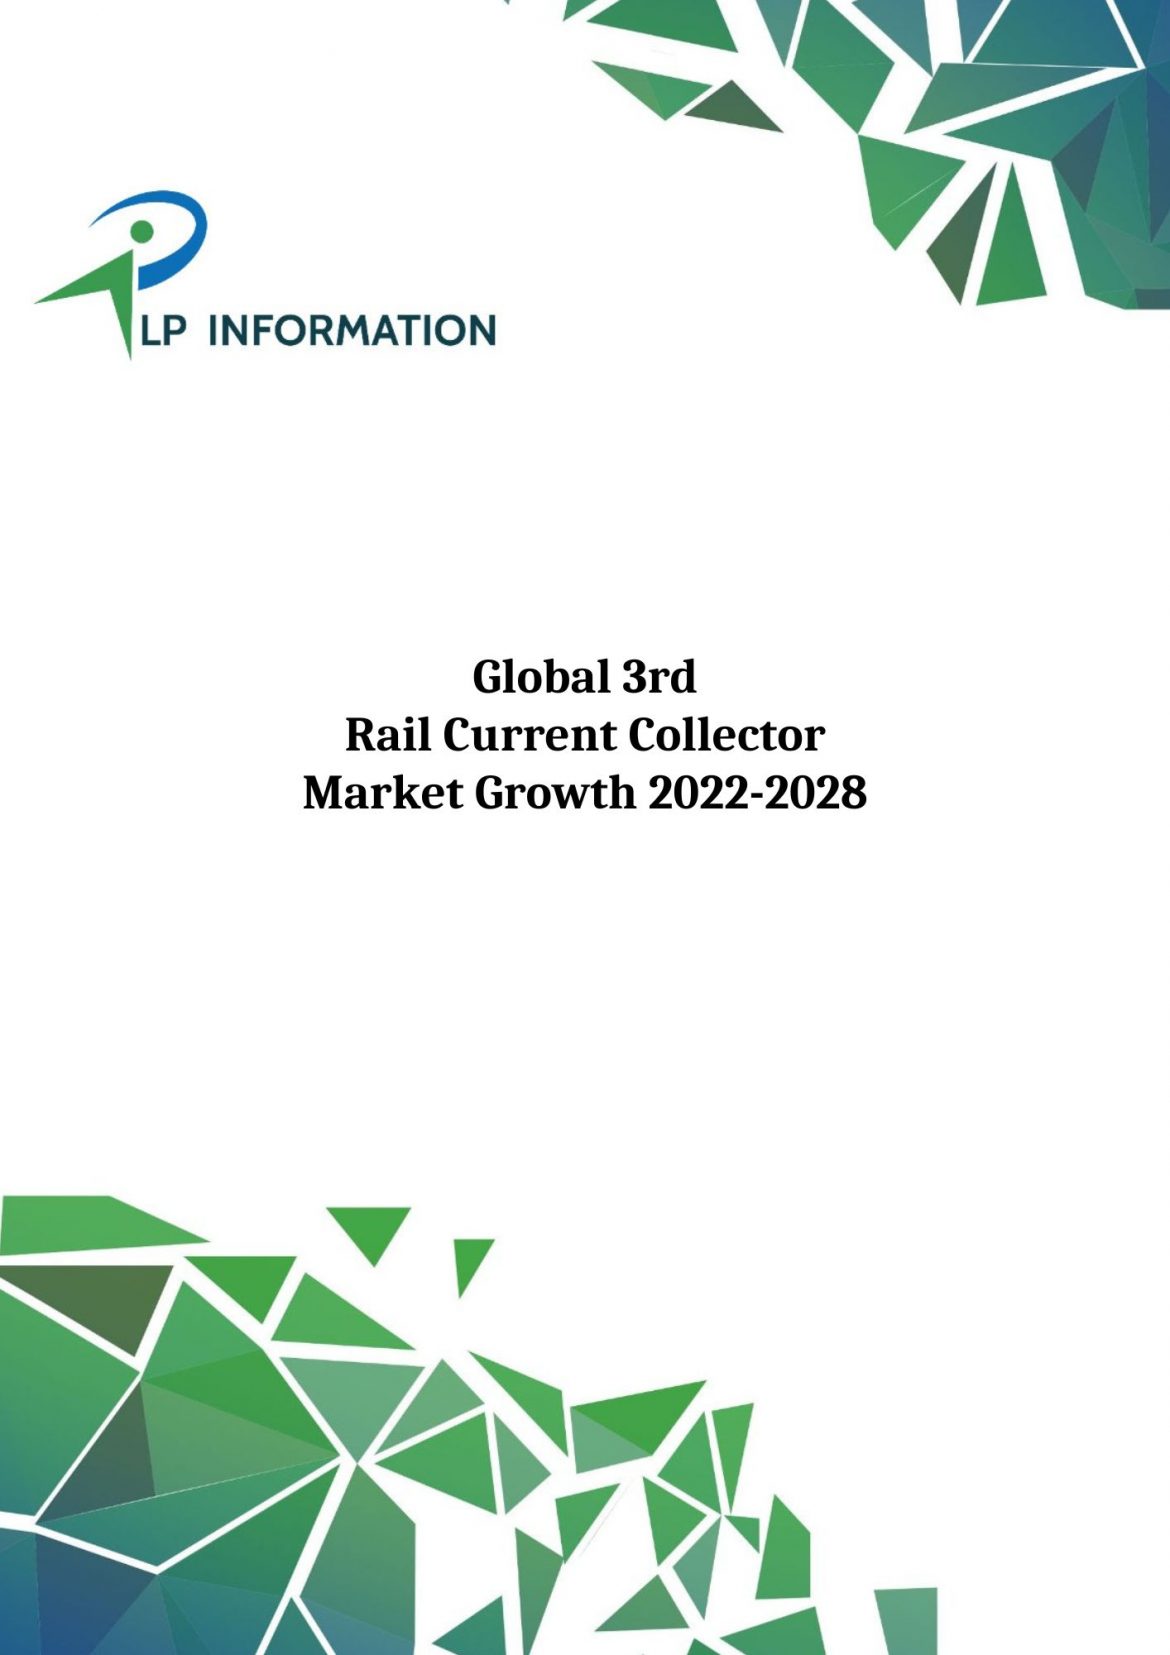 Global 3rd Rail Current Collector Market Growth 2022-2028